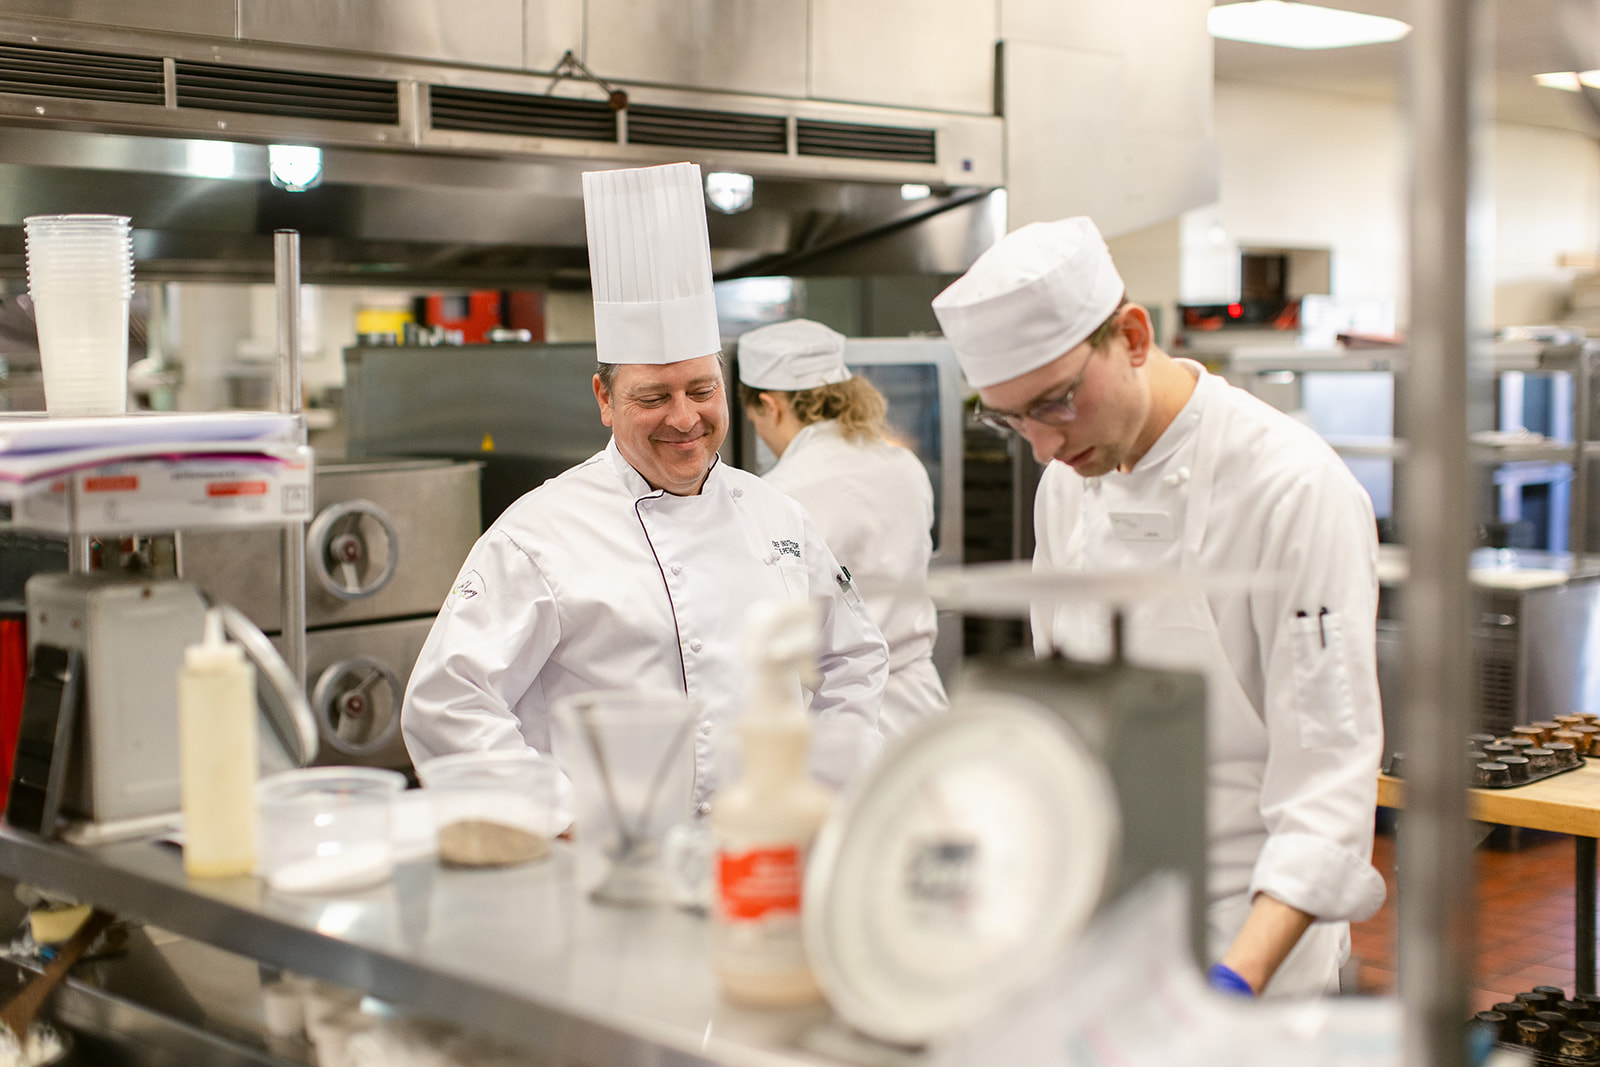 Two people in kitchen wearing chef jackets and hats.